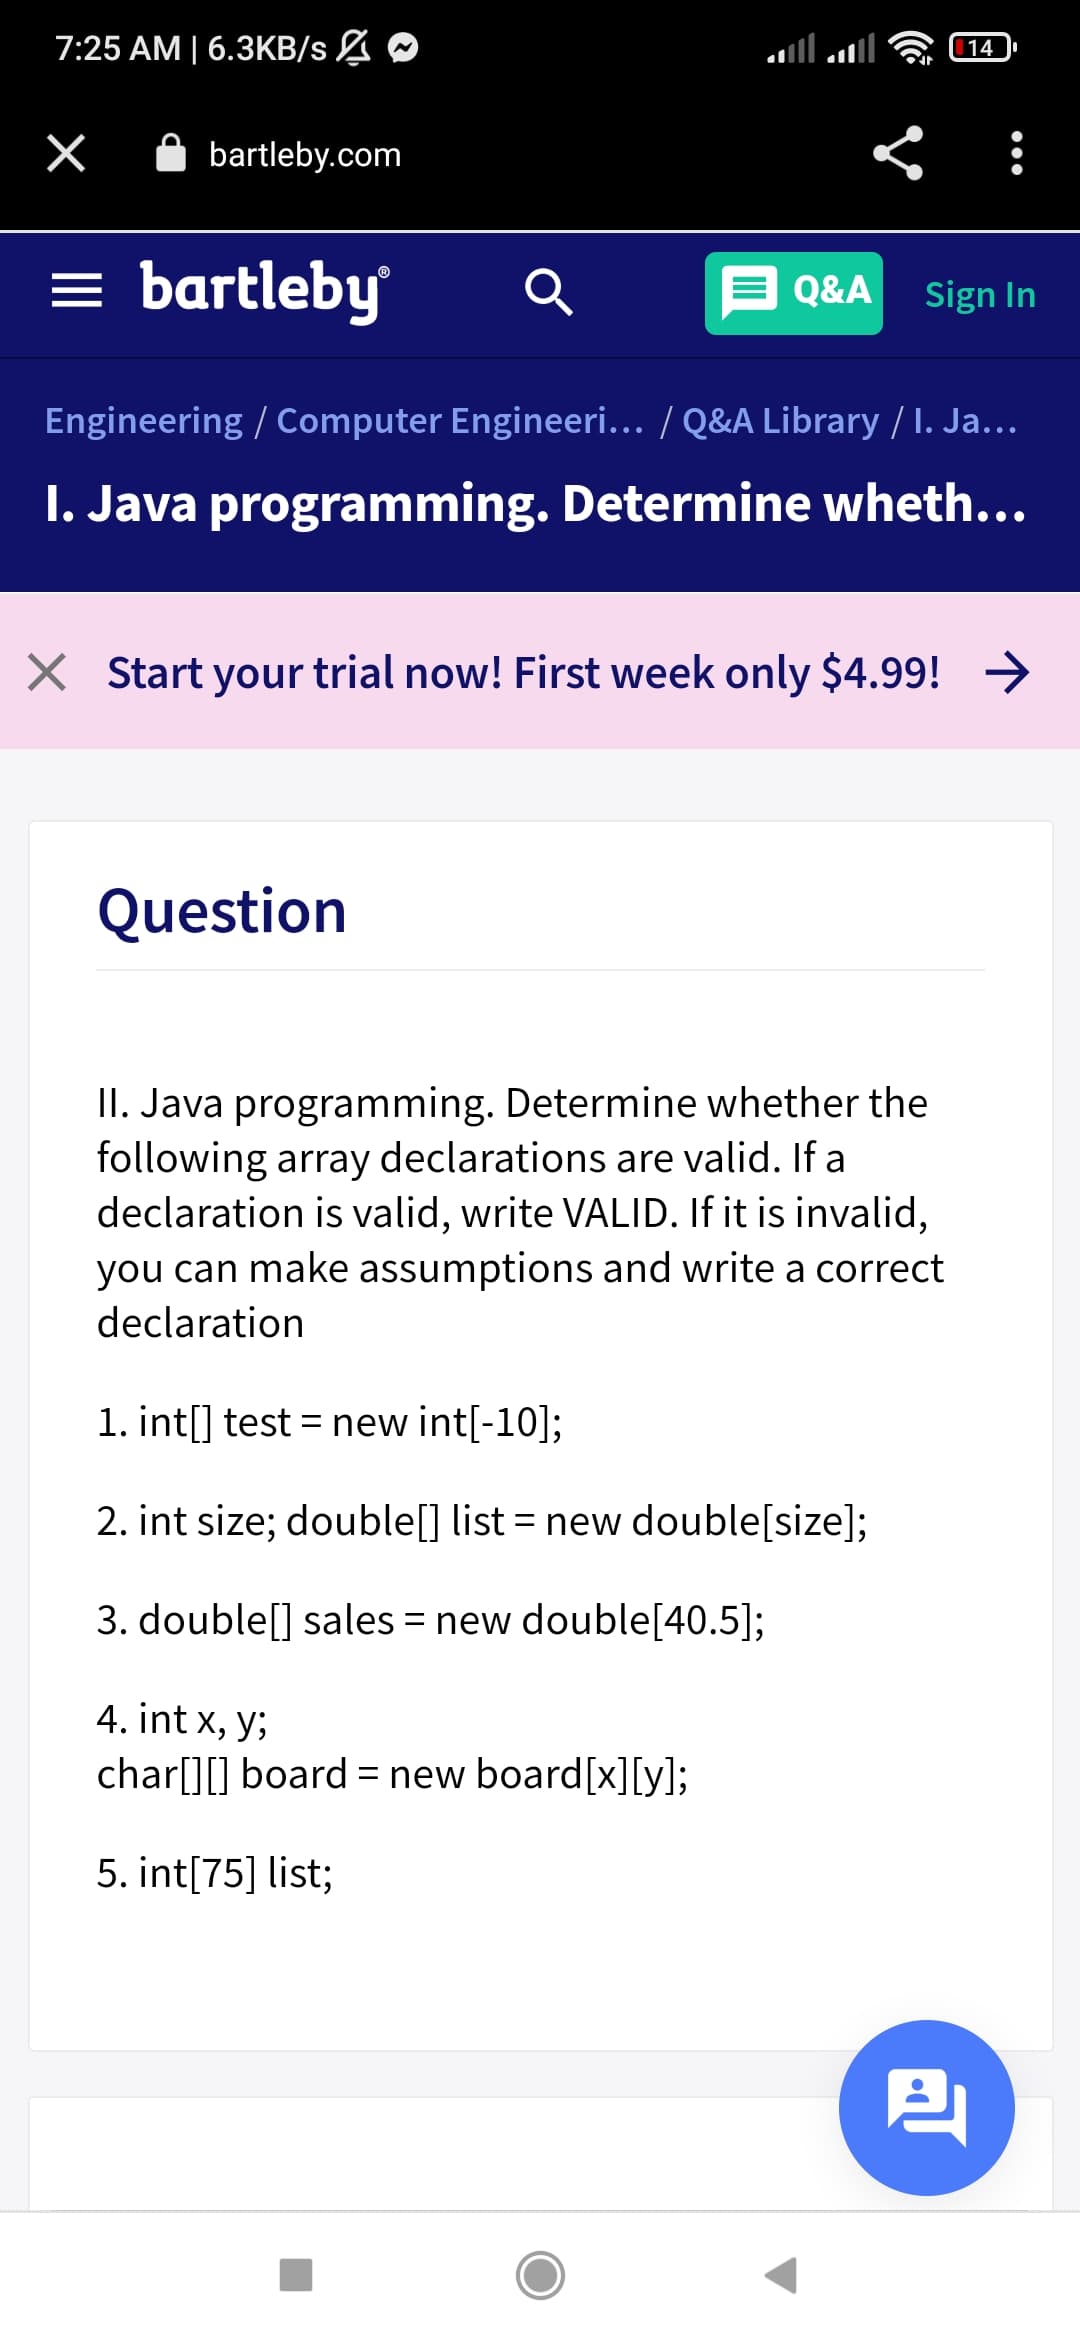 7:25 АМ | 6.ЗКB/s Z
14
A bartleby.com
= bartleby
Q&A
Sign In
Engineering / Computer Engineeri... / Q&A Library / I. Ja...
I. Java programming. Determine wheth...
X Start your trial now! First week only $4.99! →
Question
II. Java programming. Determine whether the
following array declarations are valid. If a
declaration is valid, write VALID. If it is invalid,
you can make assumptions and write a correct
declaration
1. int[] test = new int[-10];
2. int size; double[] list = new double[size];
3. double[] sales = new double[40.5];
4. int x, y;
char[][] board = new board[x][y];
5. int[75] list;
